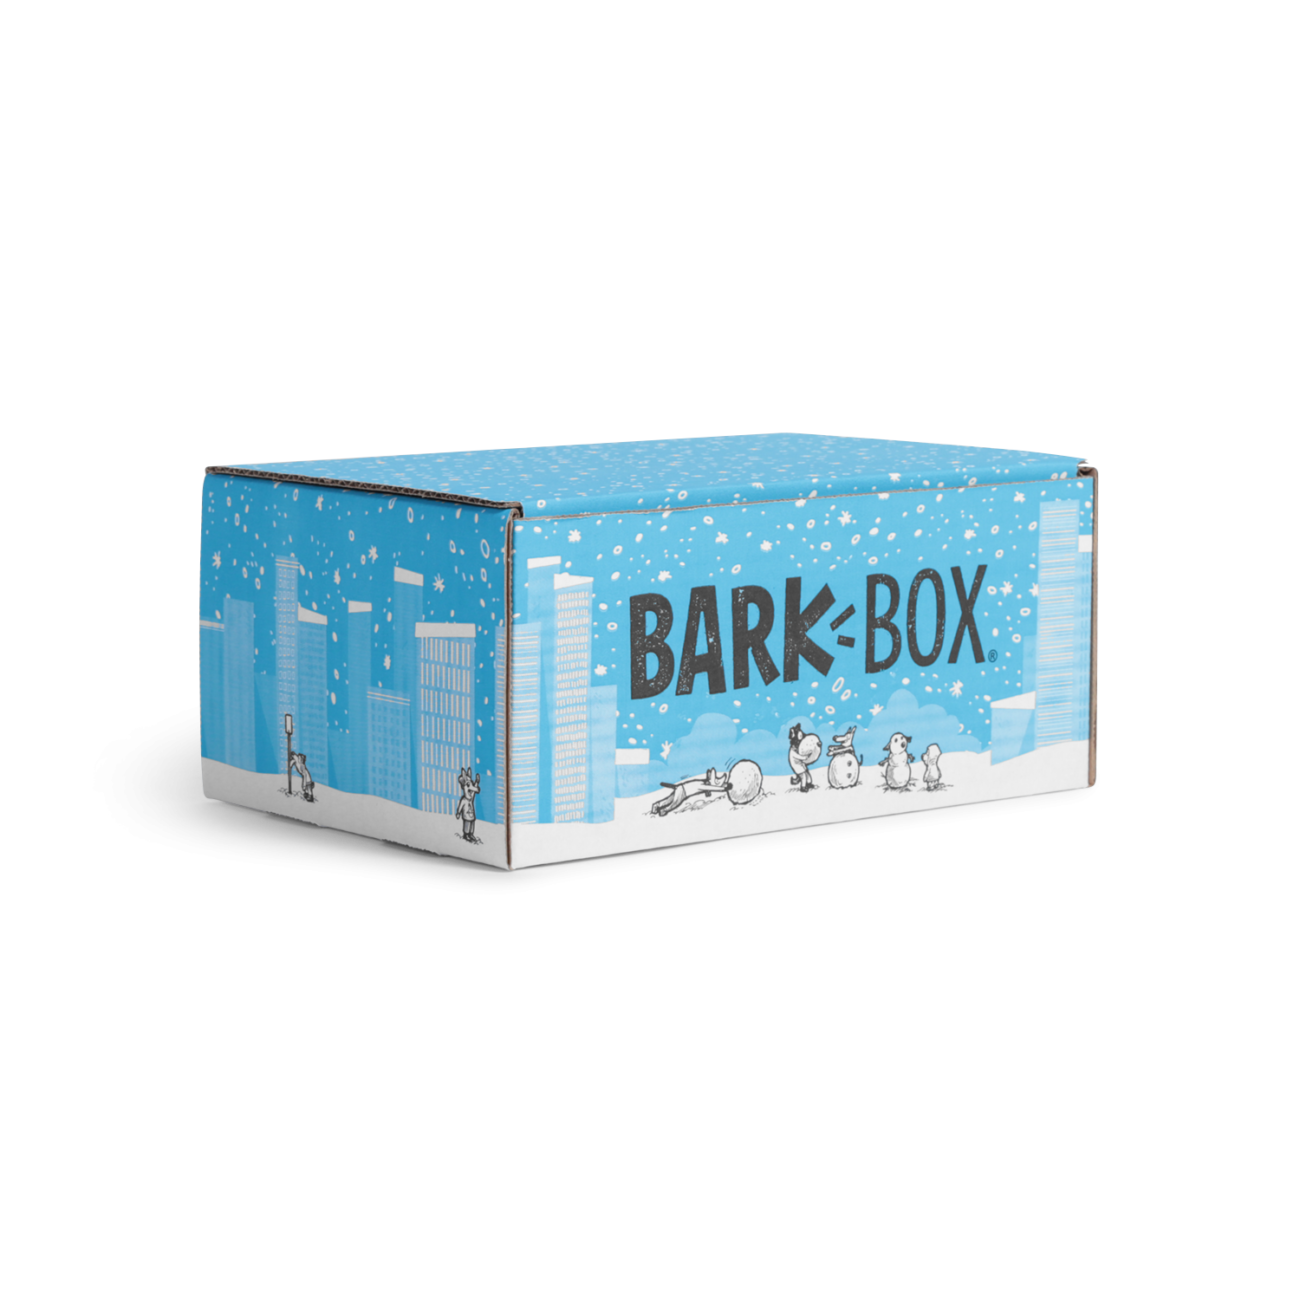 Custom roll end tuck top corrugated mailer box for BarkBox with roll end base, tuck top lid. Flexography on mottled white liner.